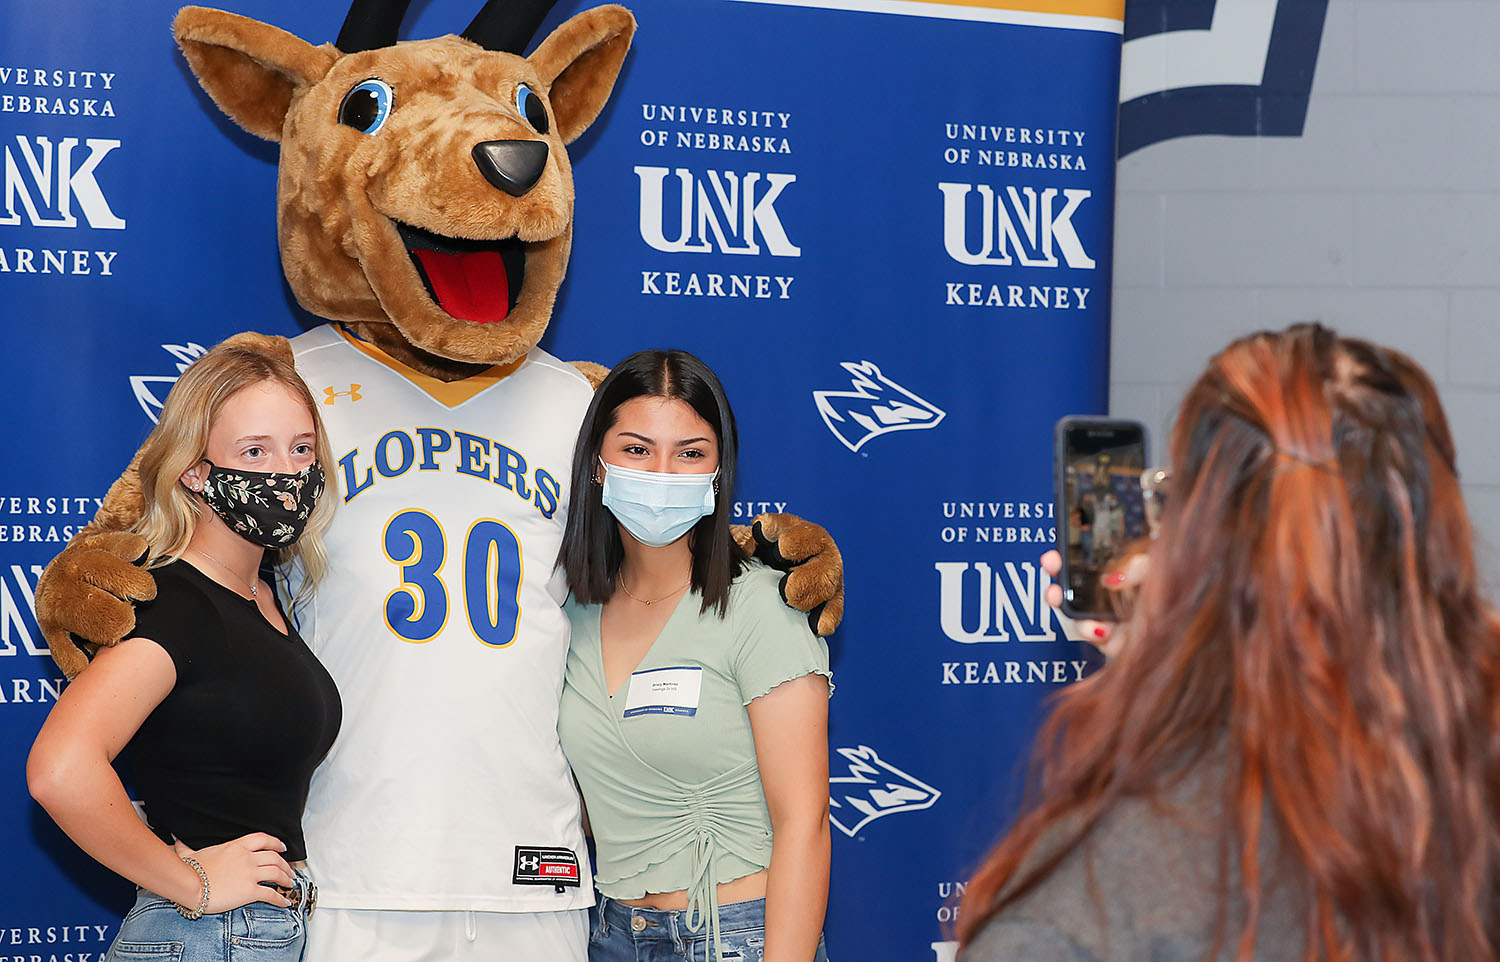 More than 80 high school seniors attend firstever Admitted Student Day